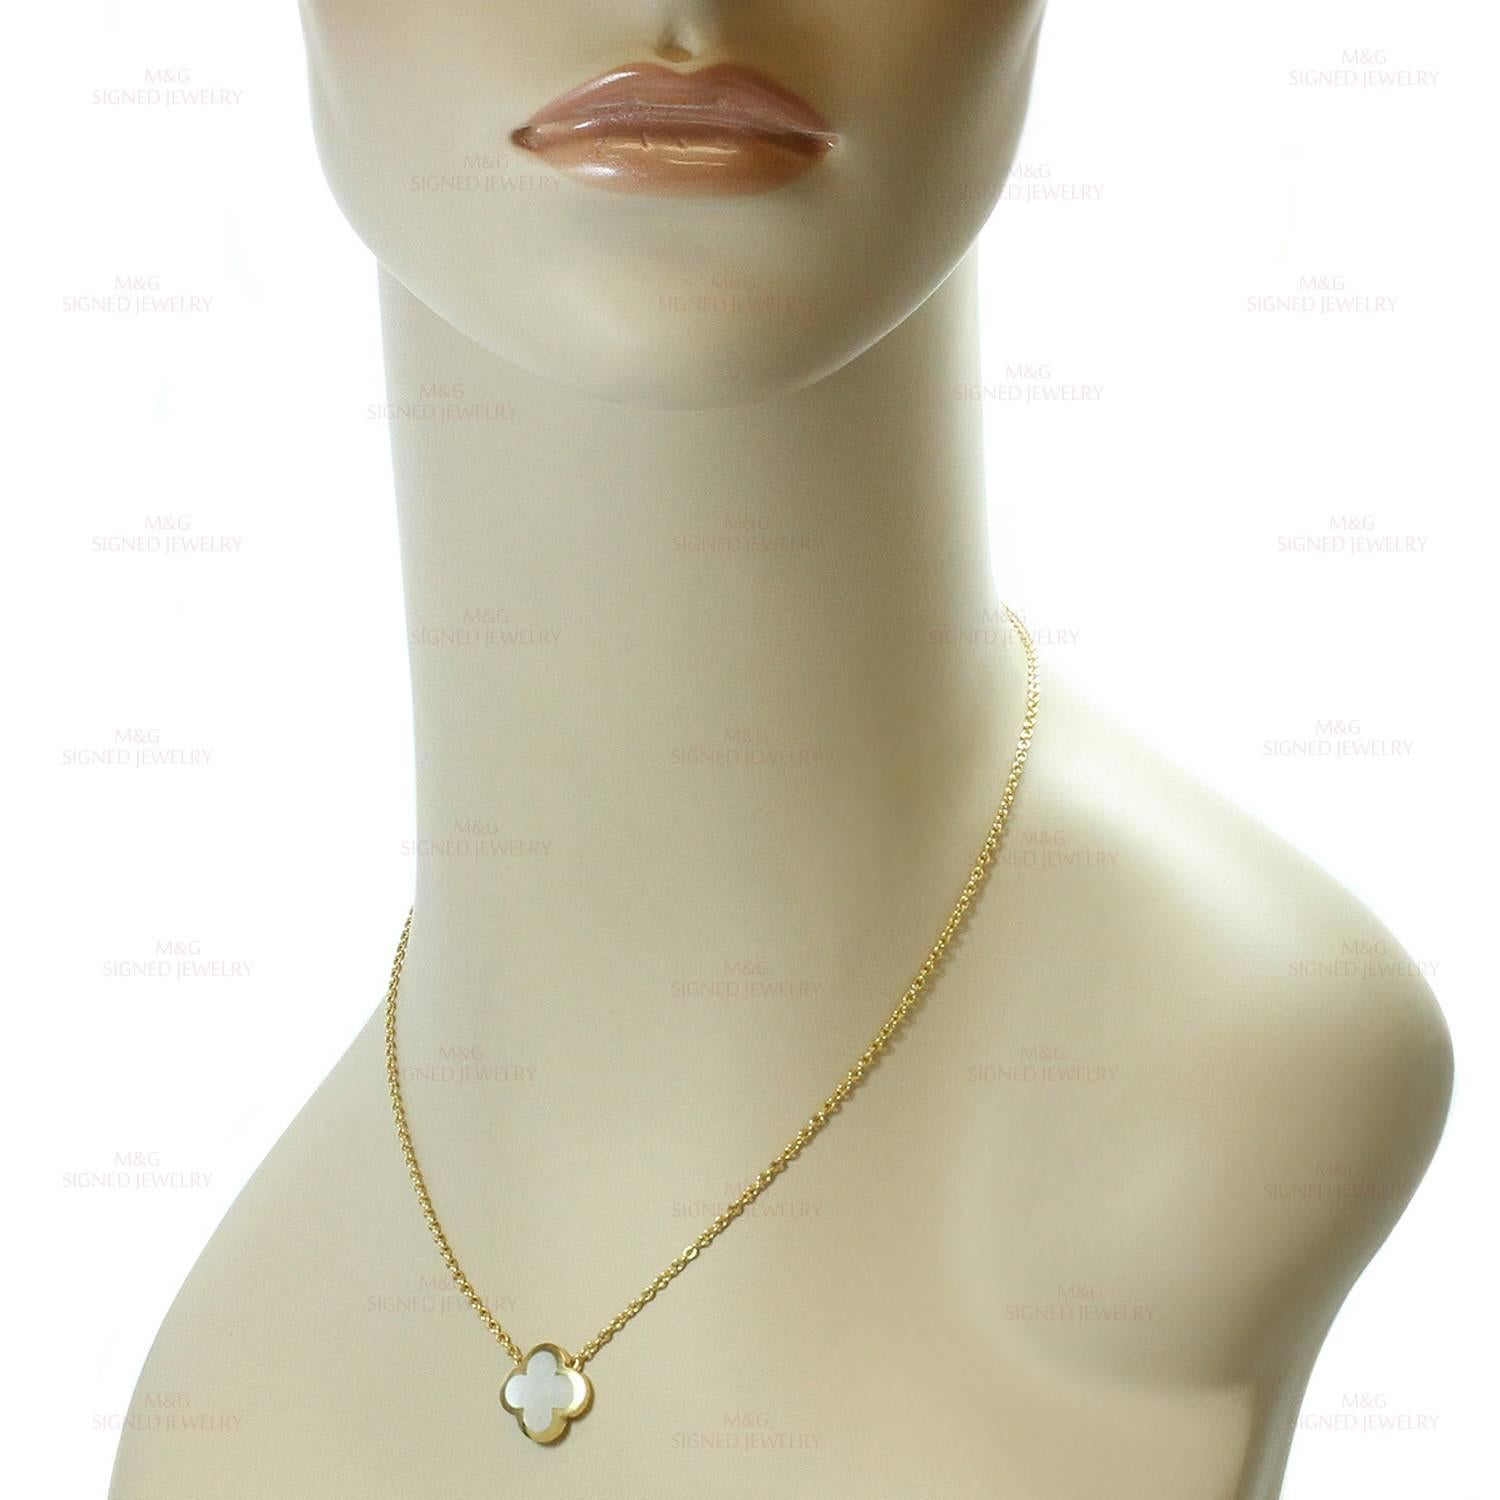 Van Cleef & Arpels Pure Alhambra Mother-of-Pearl Yellow Gold Pendant Necklace 1